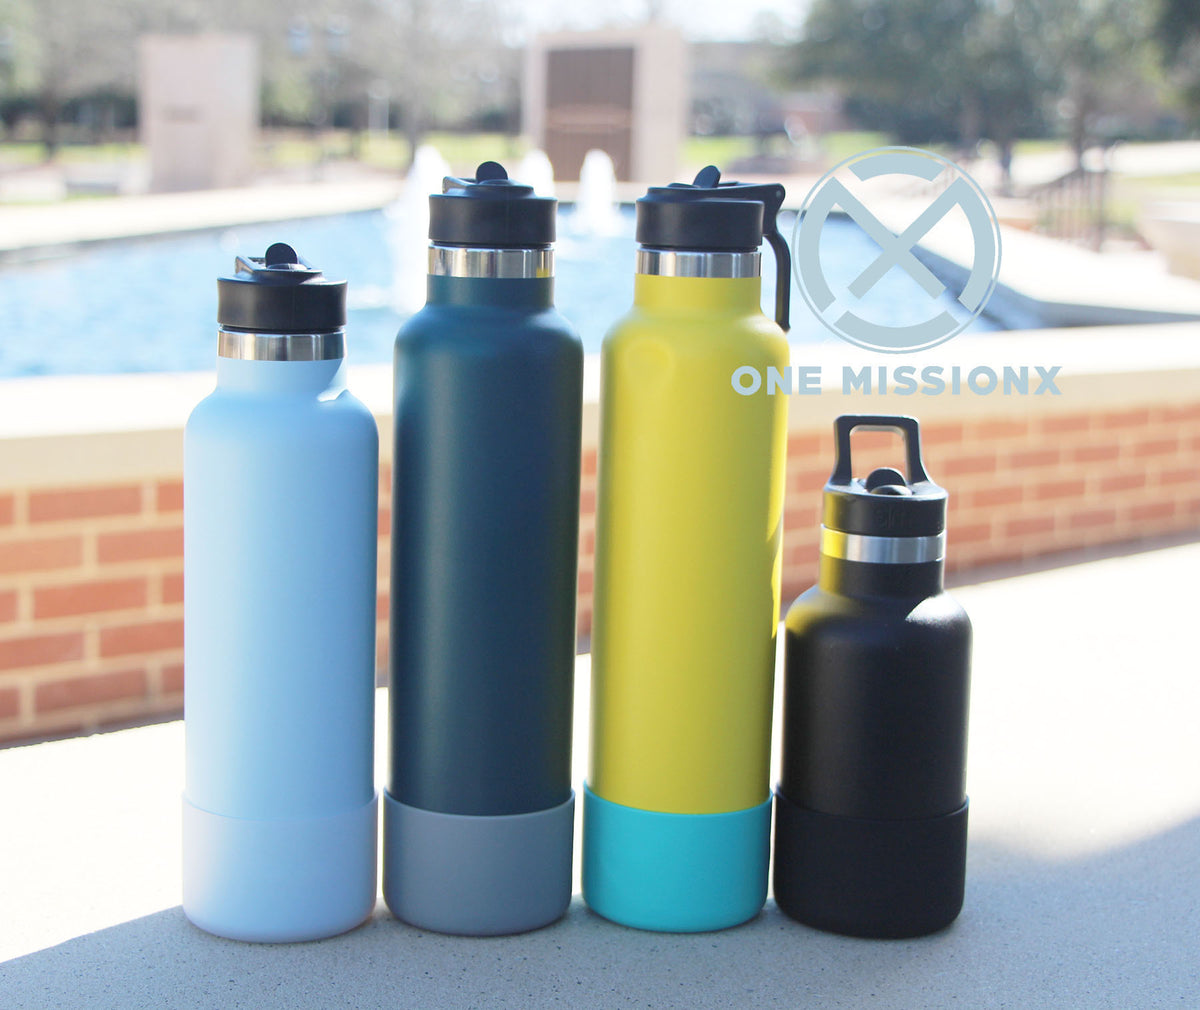 HYDRO FLASK Silicon Flex Boot for 12-24 oz. Wide & Standard Mouth